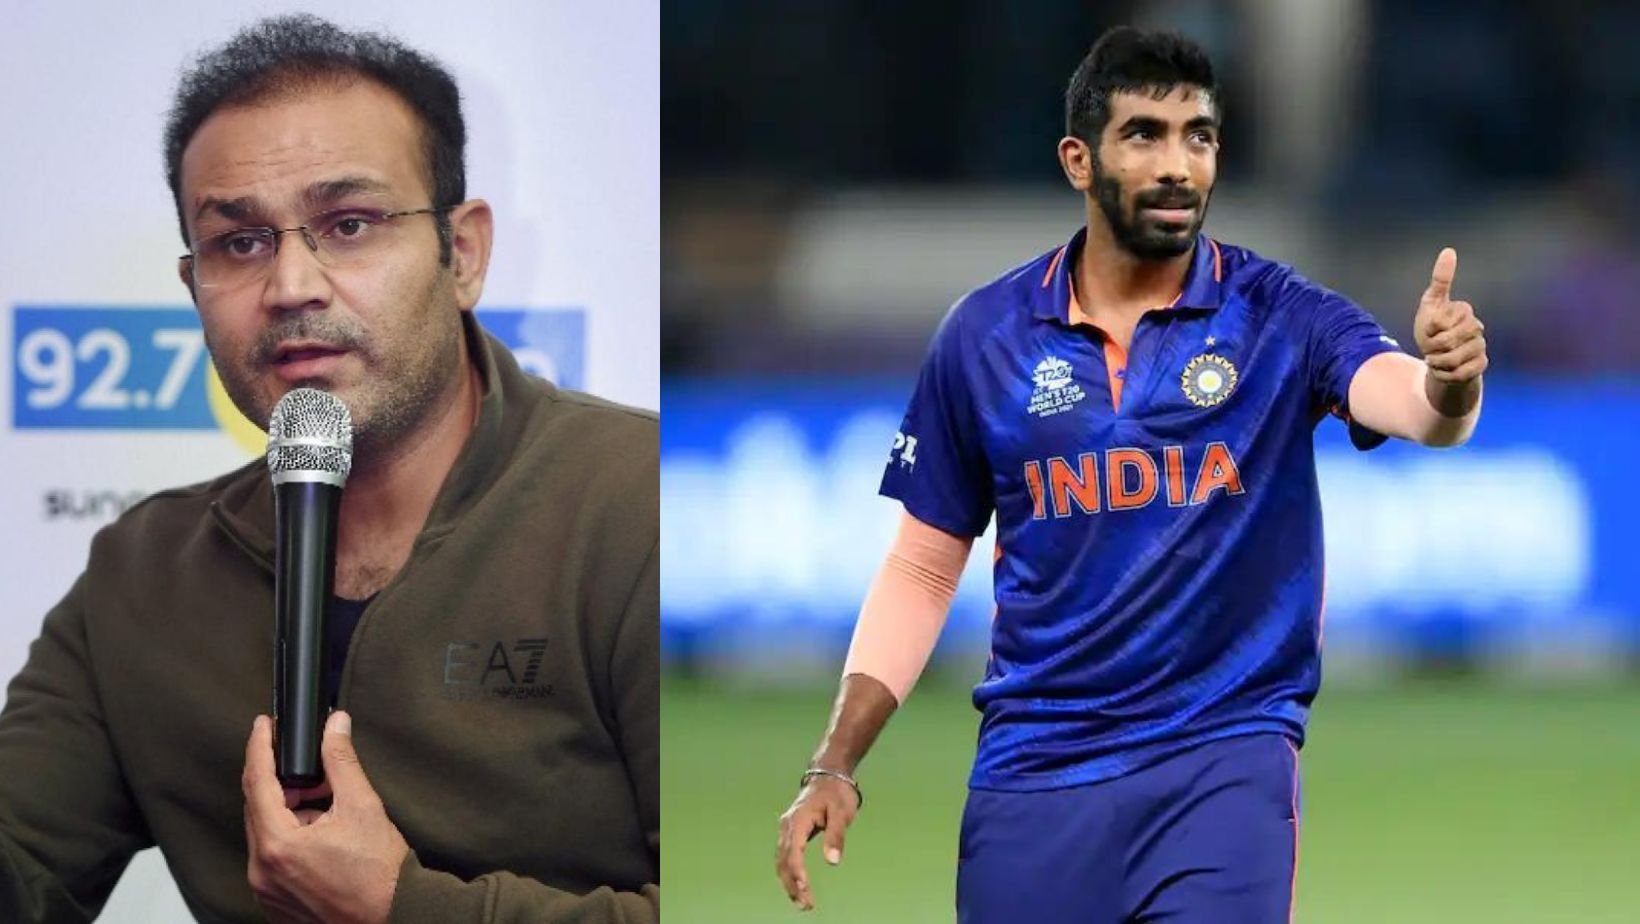 Virender Sehwag (L) throws his weight behind Jasprit Bumrah&#039;s captaincy credentials.